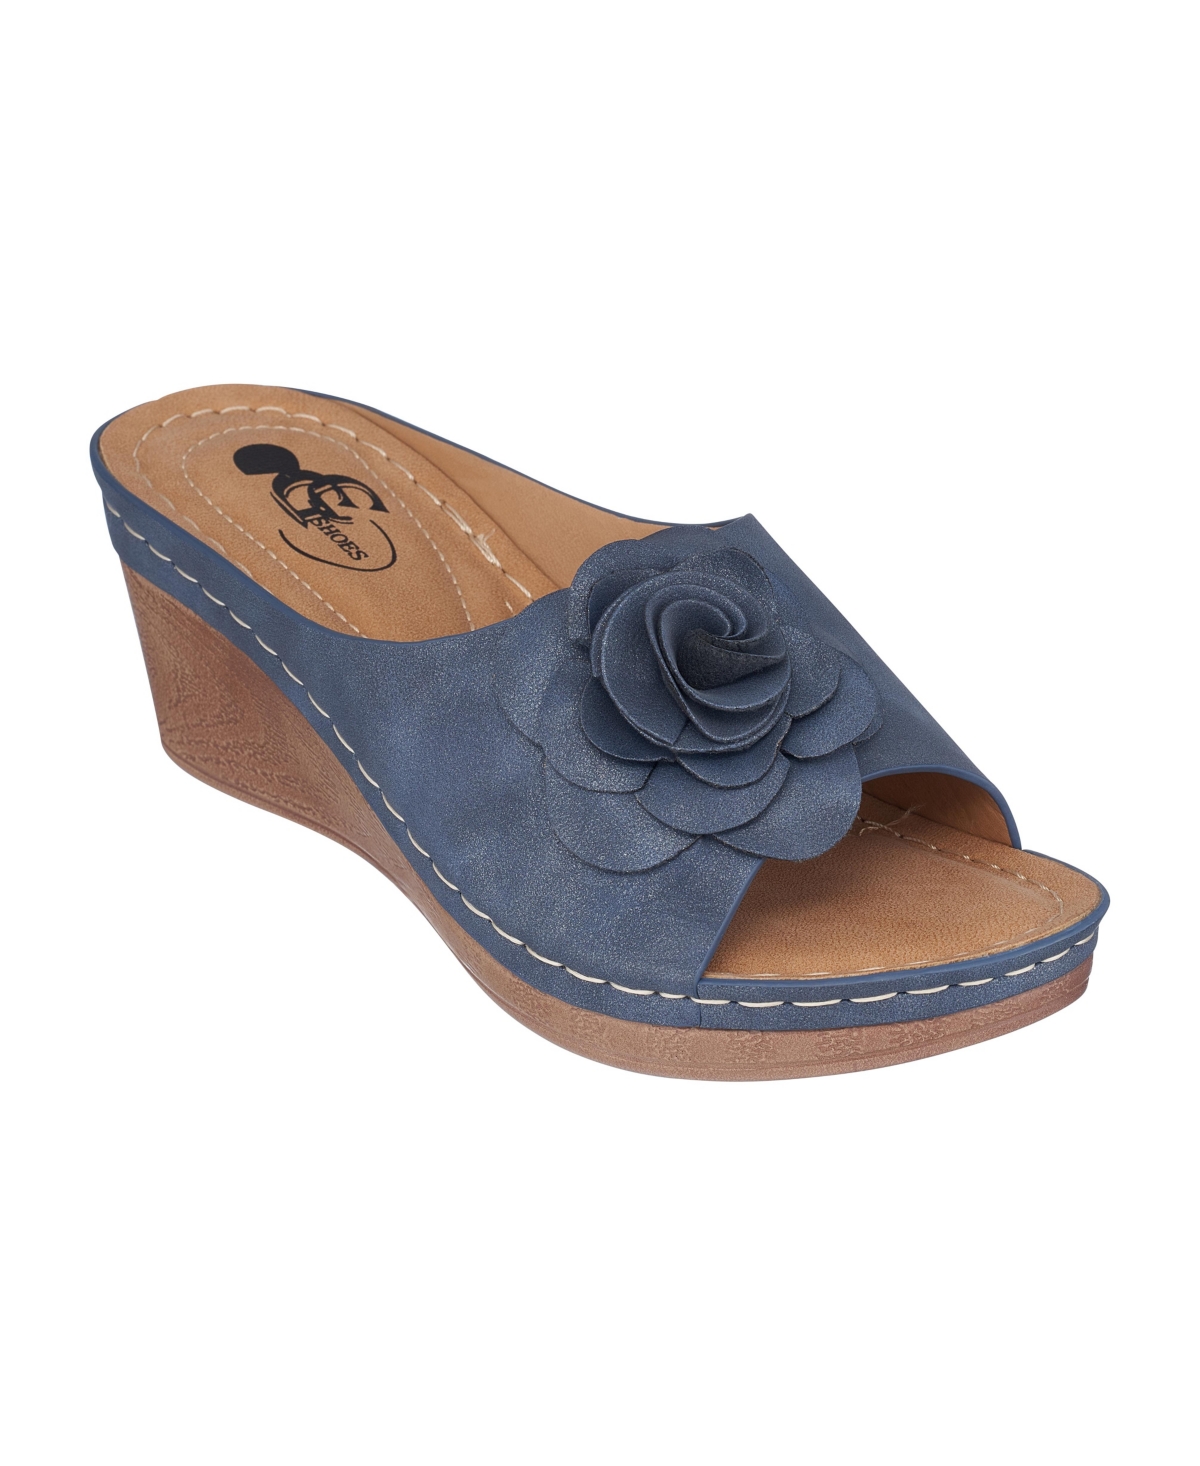 Gc Shoes Tokyo Floral Wedge Sandal In Navy